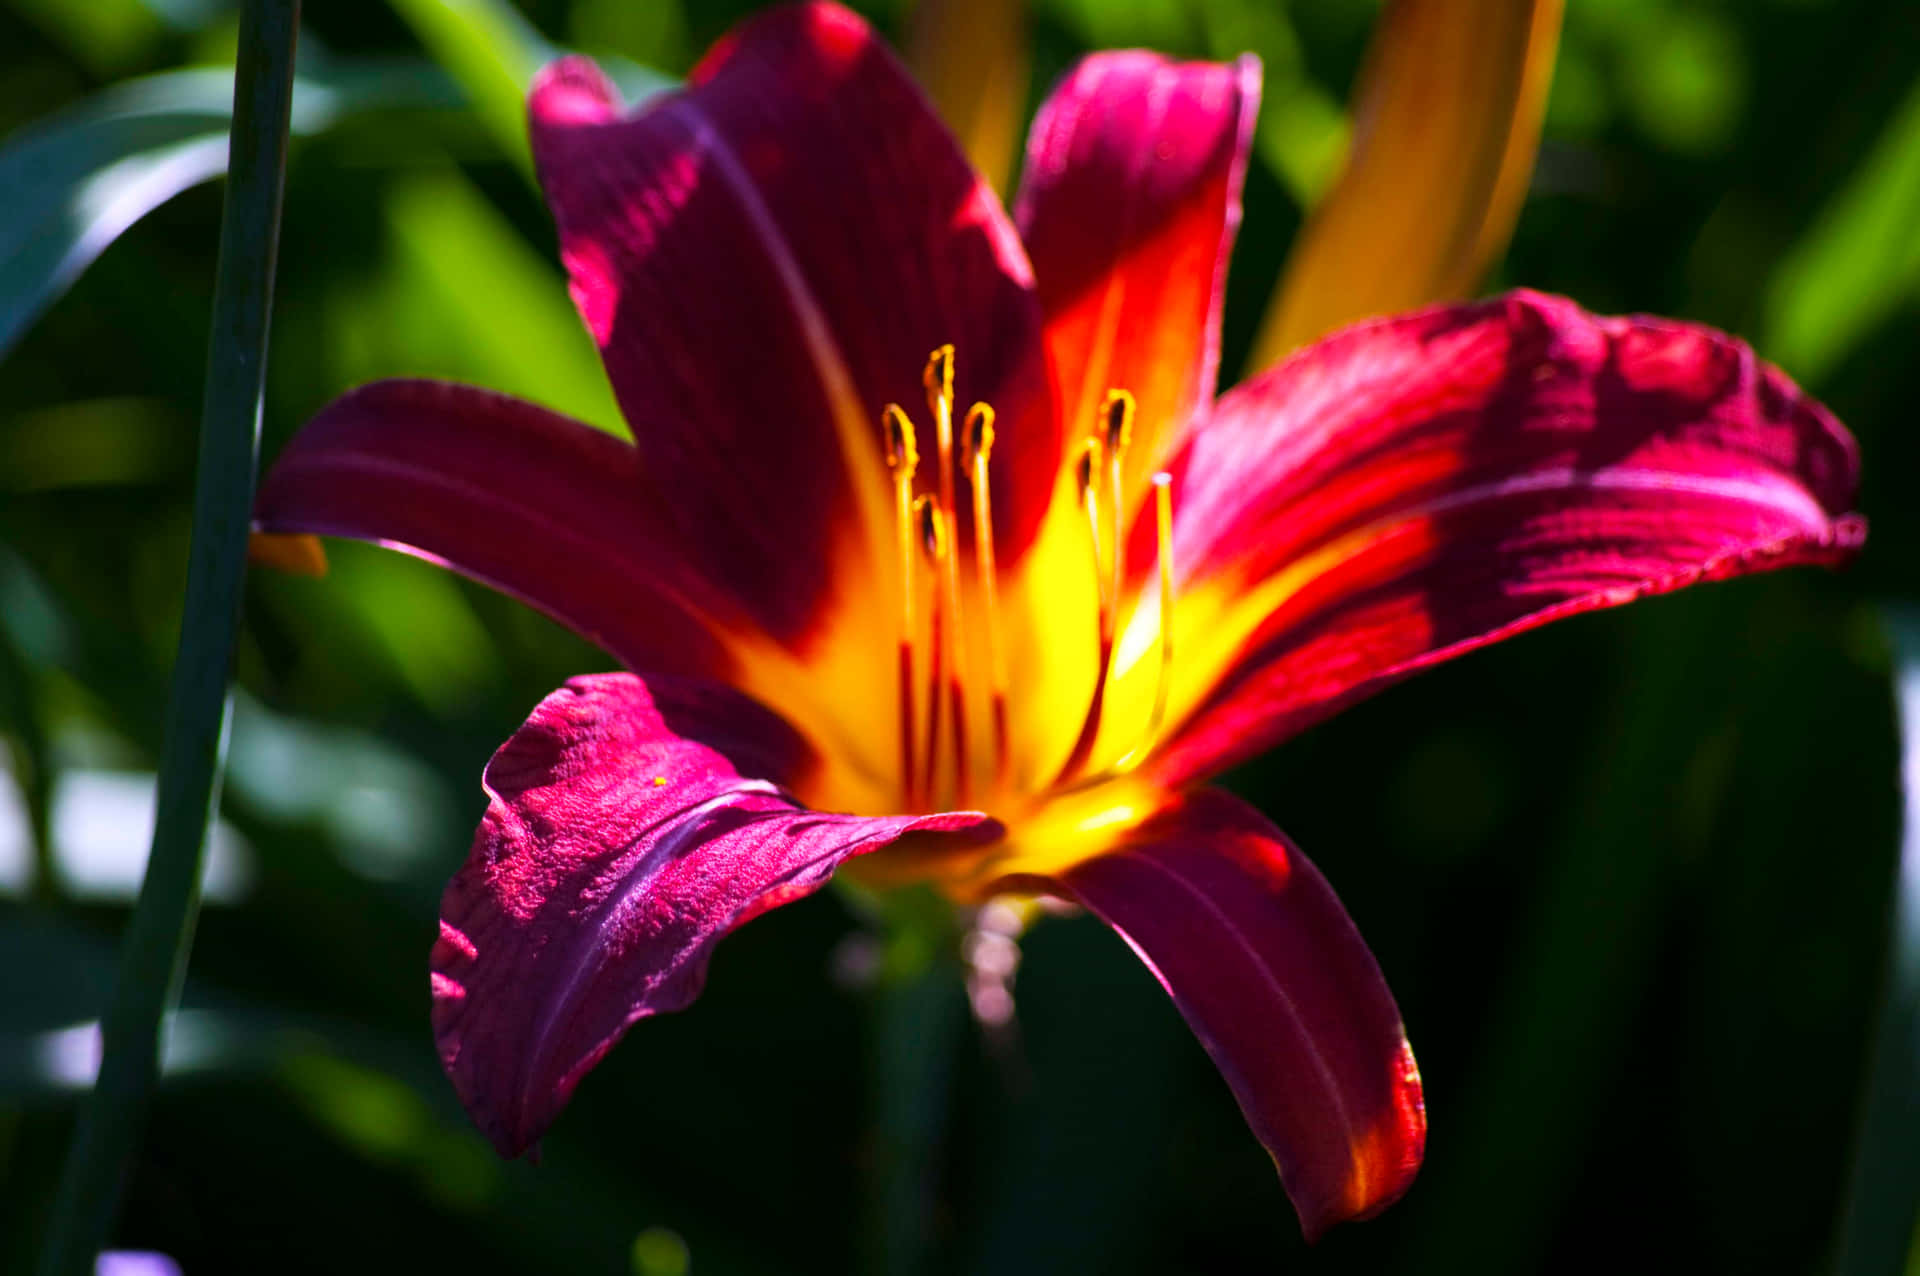 Stunning close-up of a blooming lily flower on a serene background